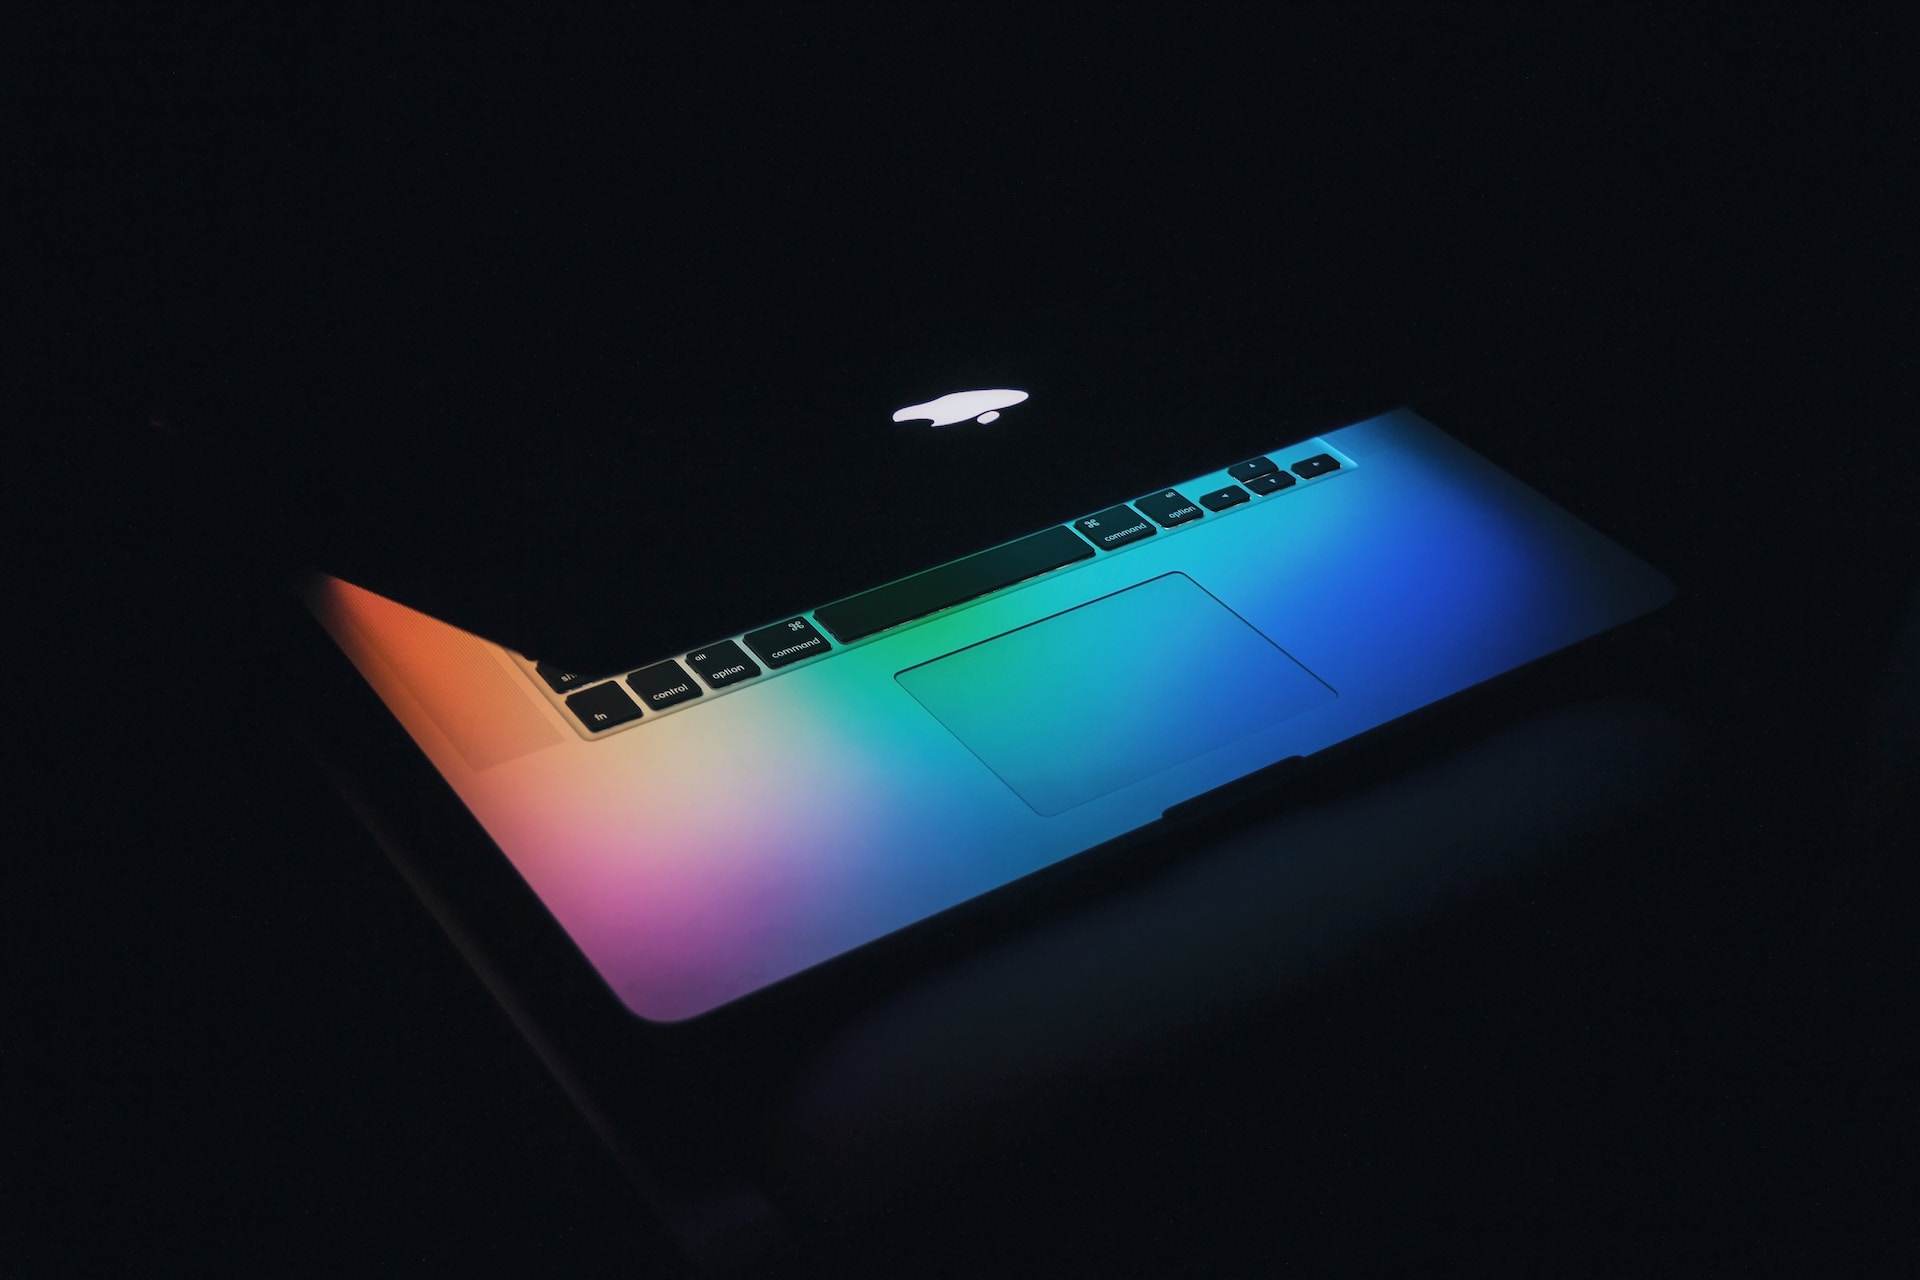 A technologically advanced macbook pro showcasing export success, highlighted by its rainbow colored appearance in the dark.